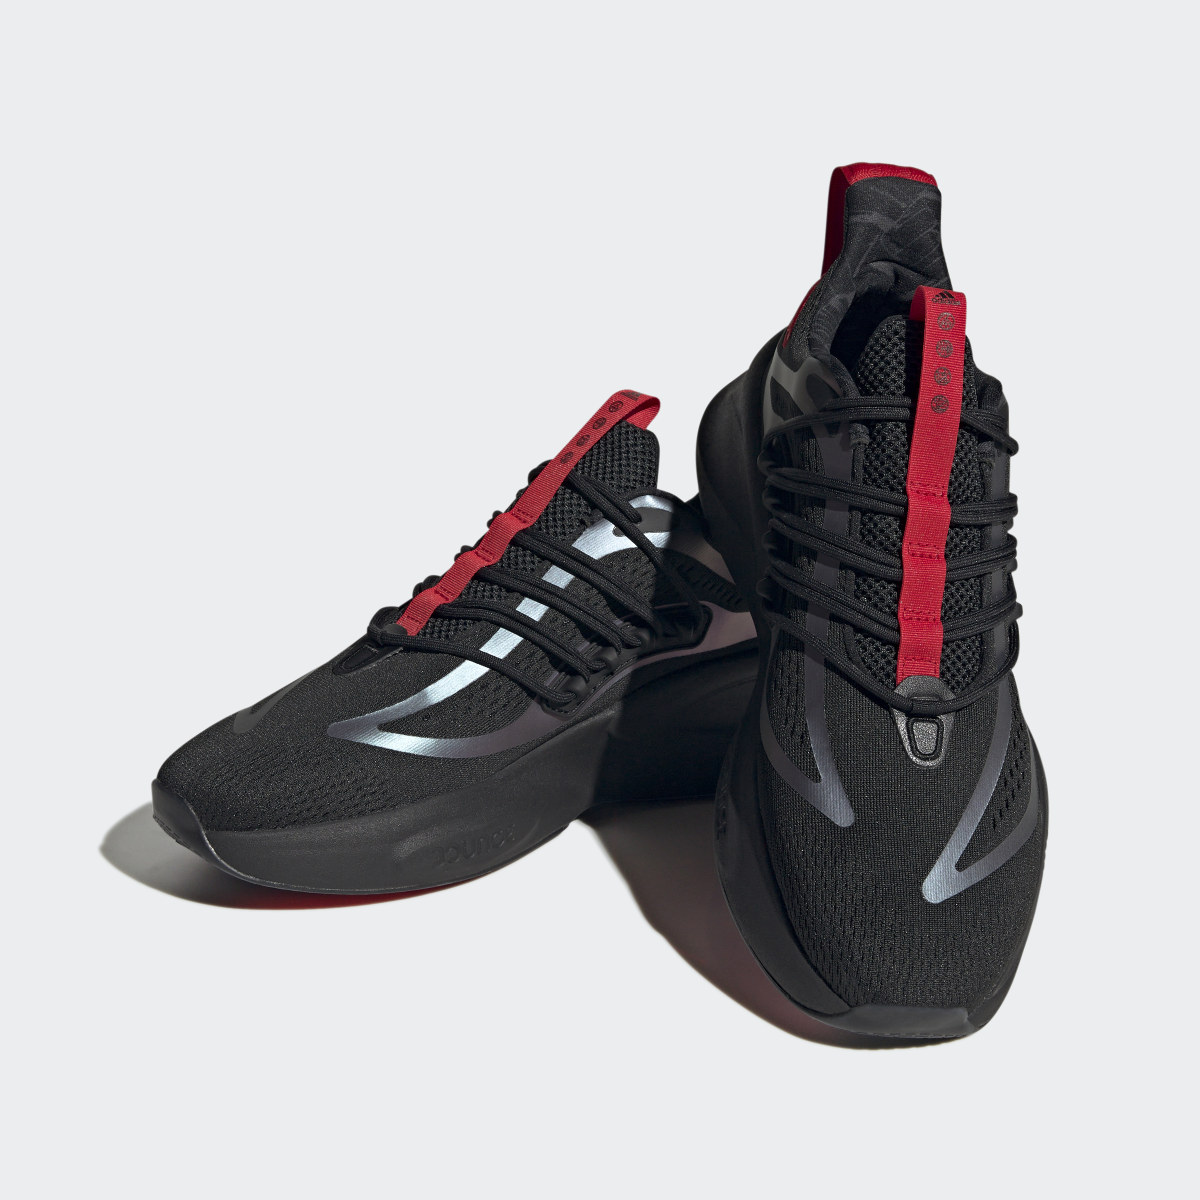 Adidas Planet Z Alphaboost V1 Shoes. 5